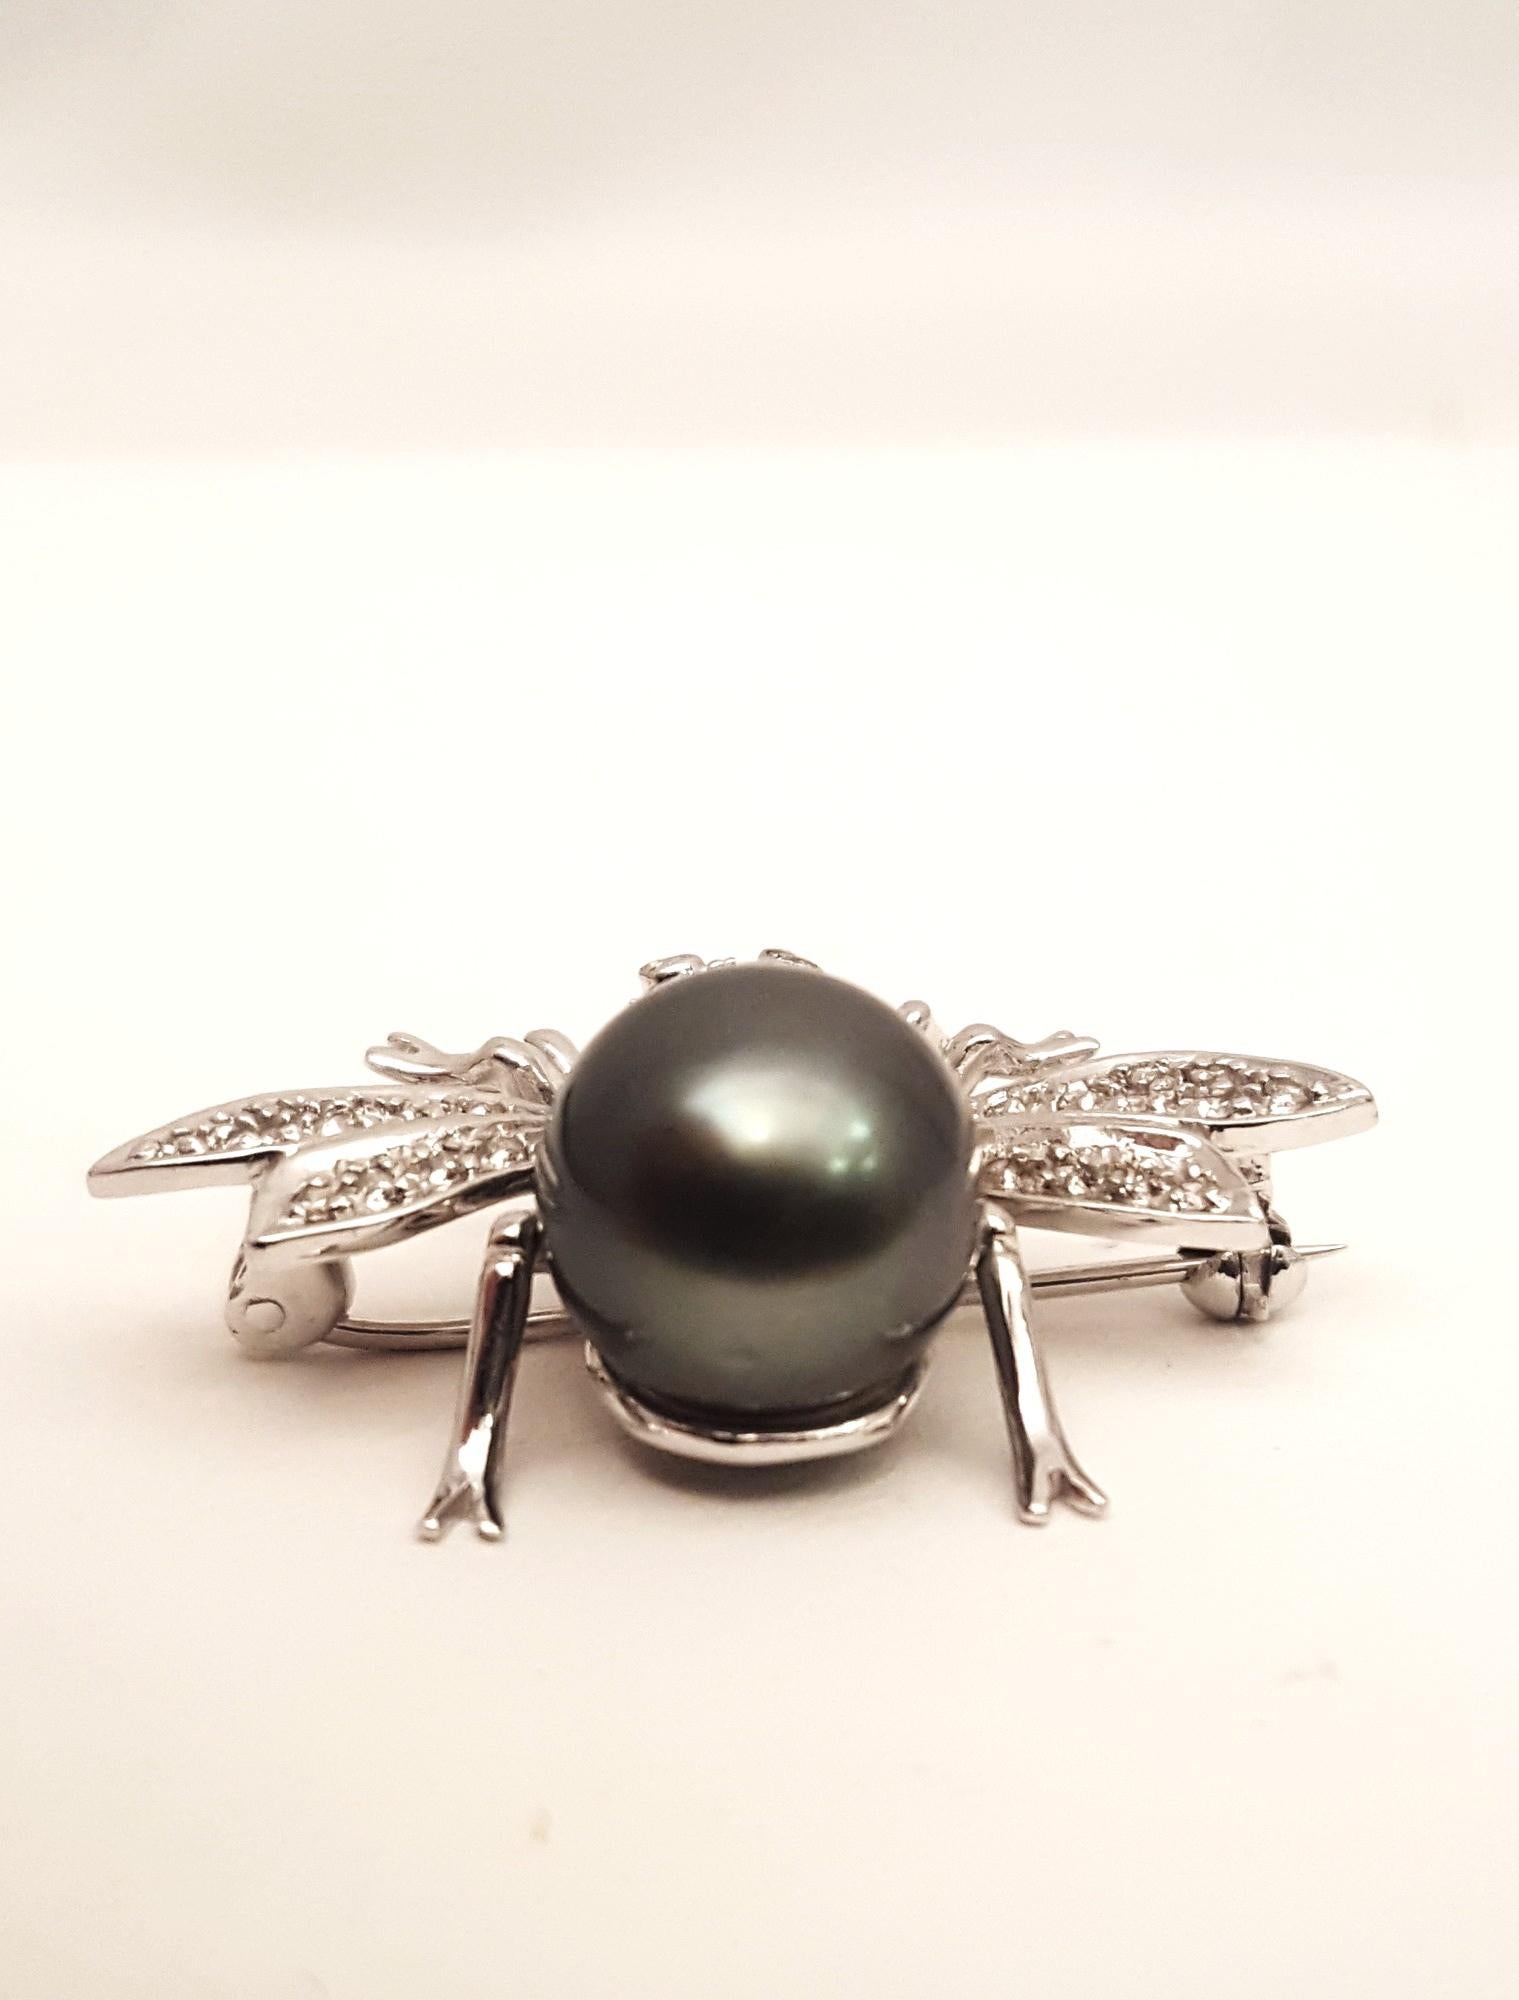 14 Karat White Gold and Sterling Silver Faux Pearl and Diamond Bee Brooch 1